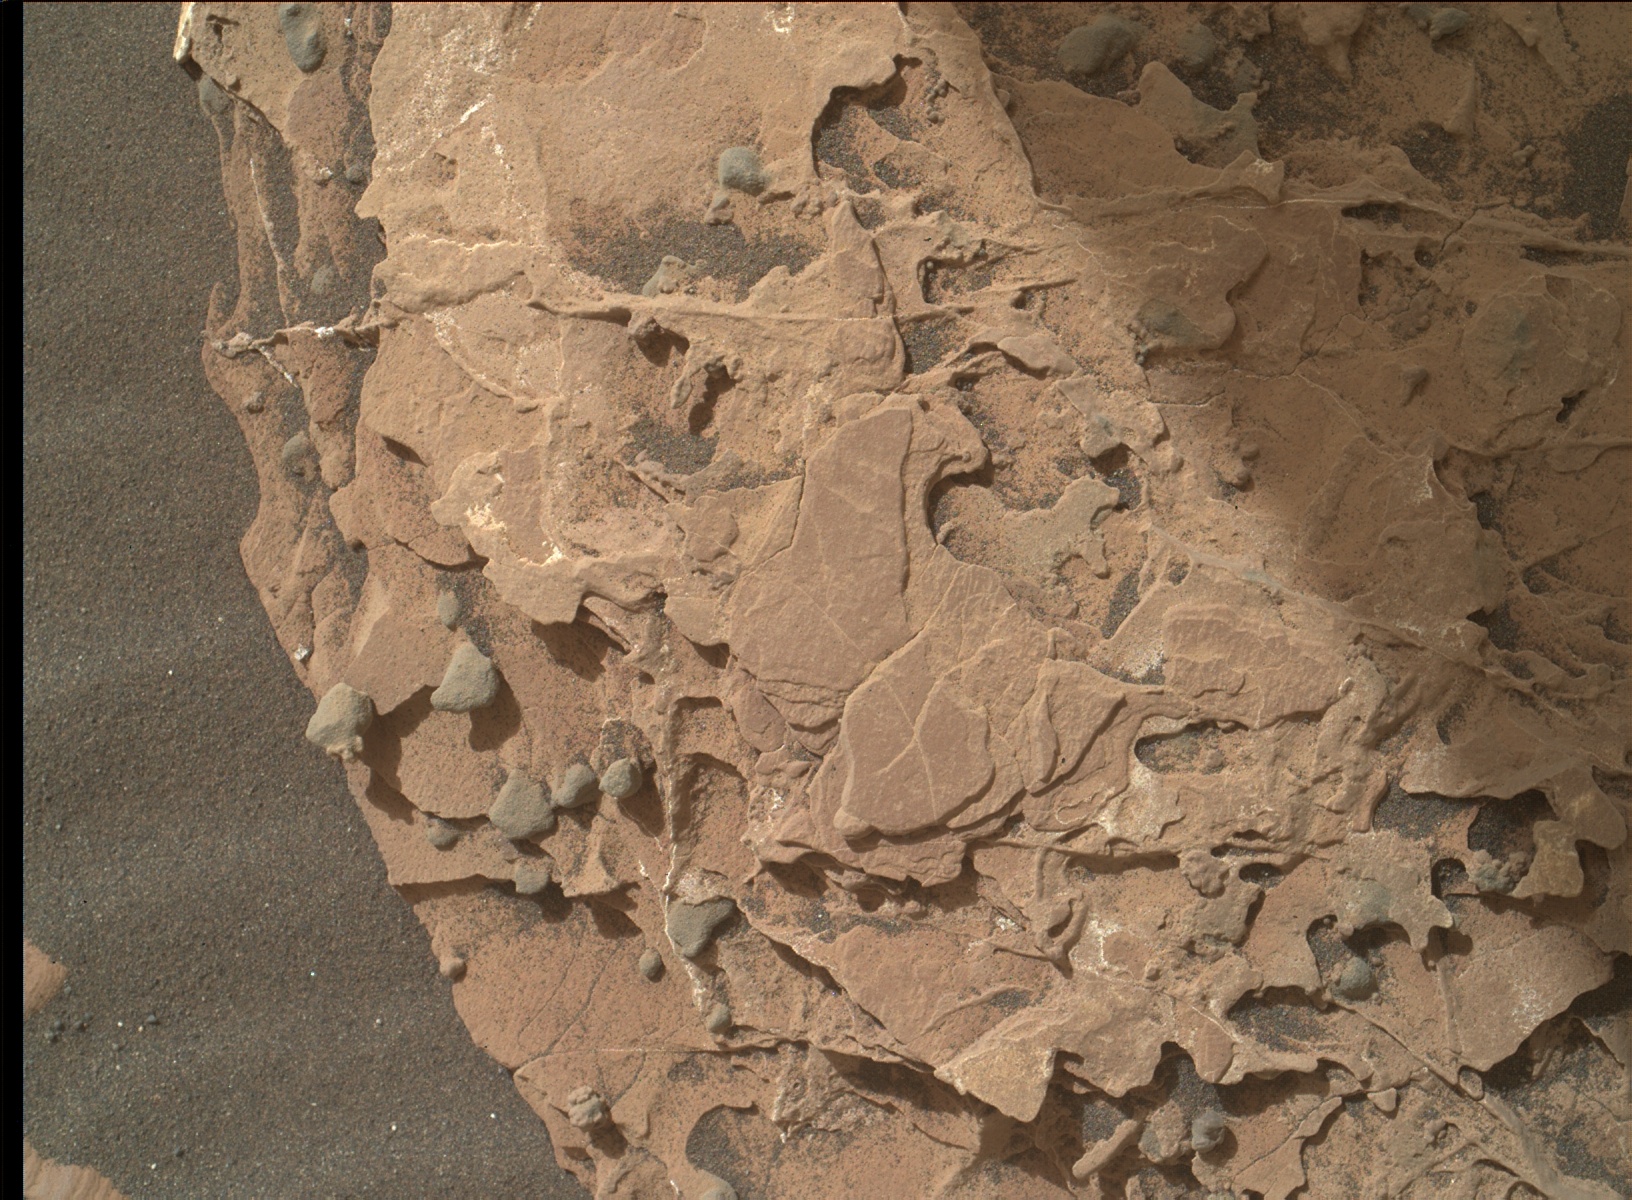 Nasa's Mars rover Curiosity acquired this image using its Mars Hand Lens Imager (MAHLI) on Sol 1744